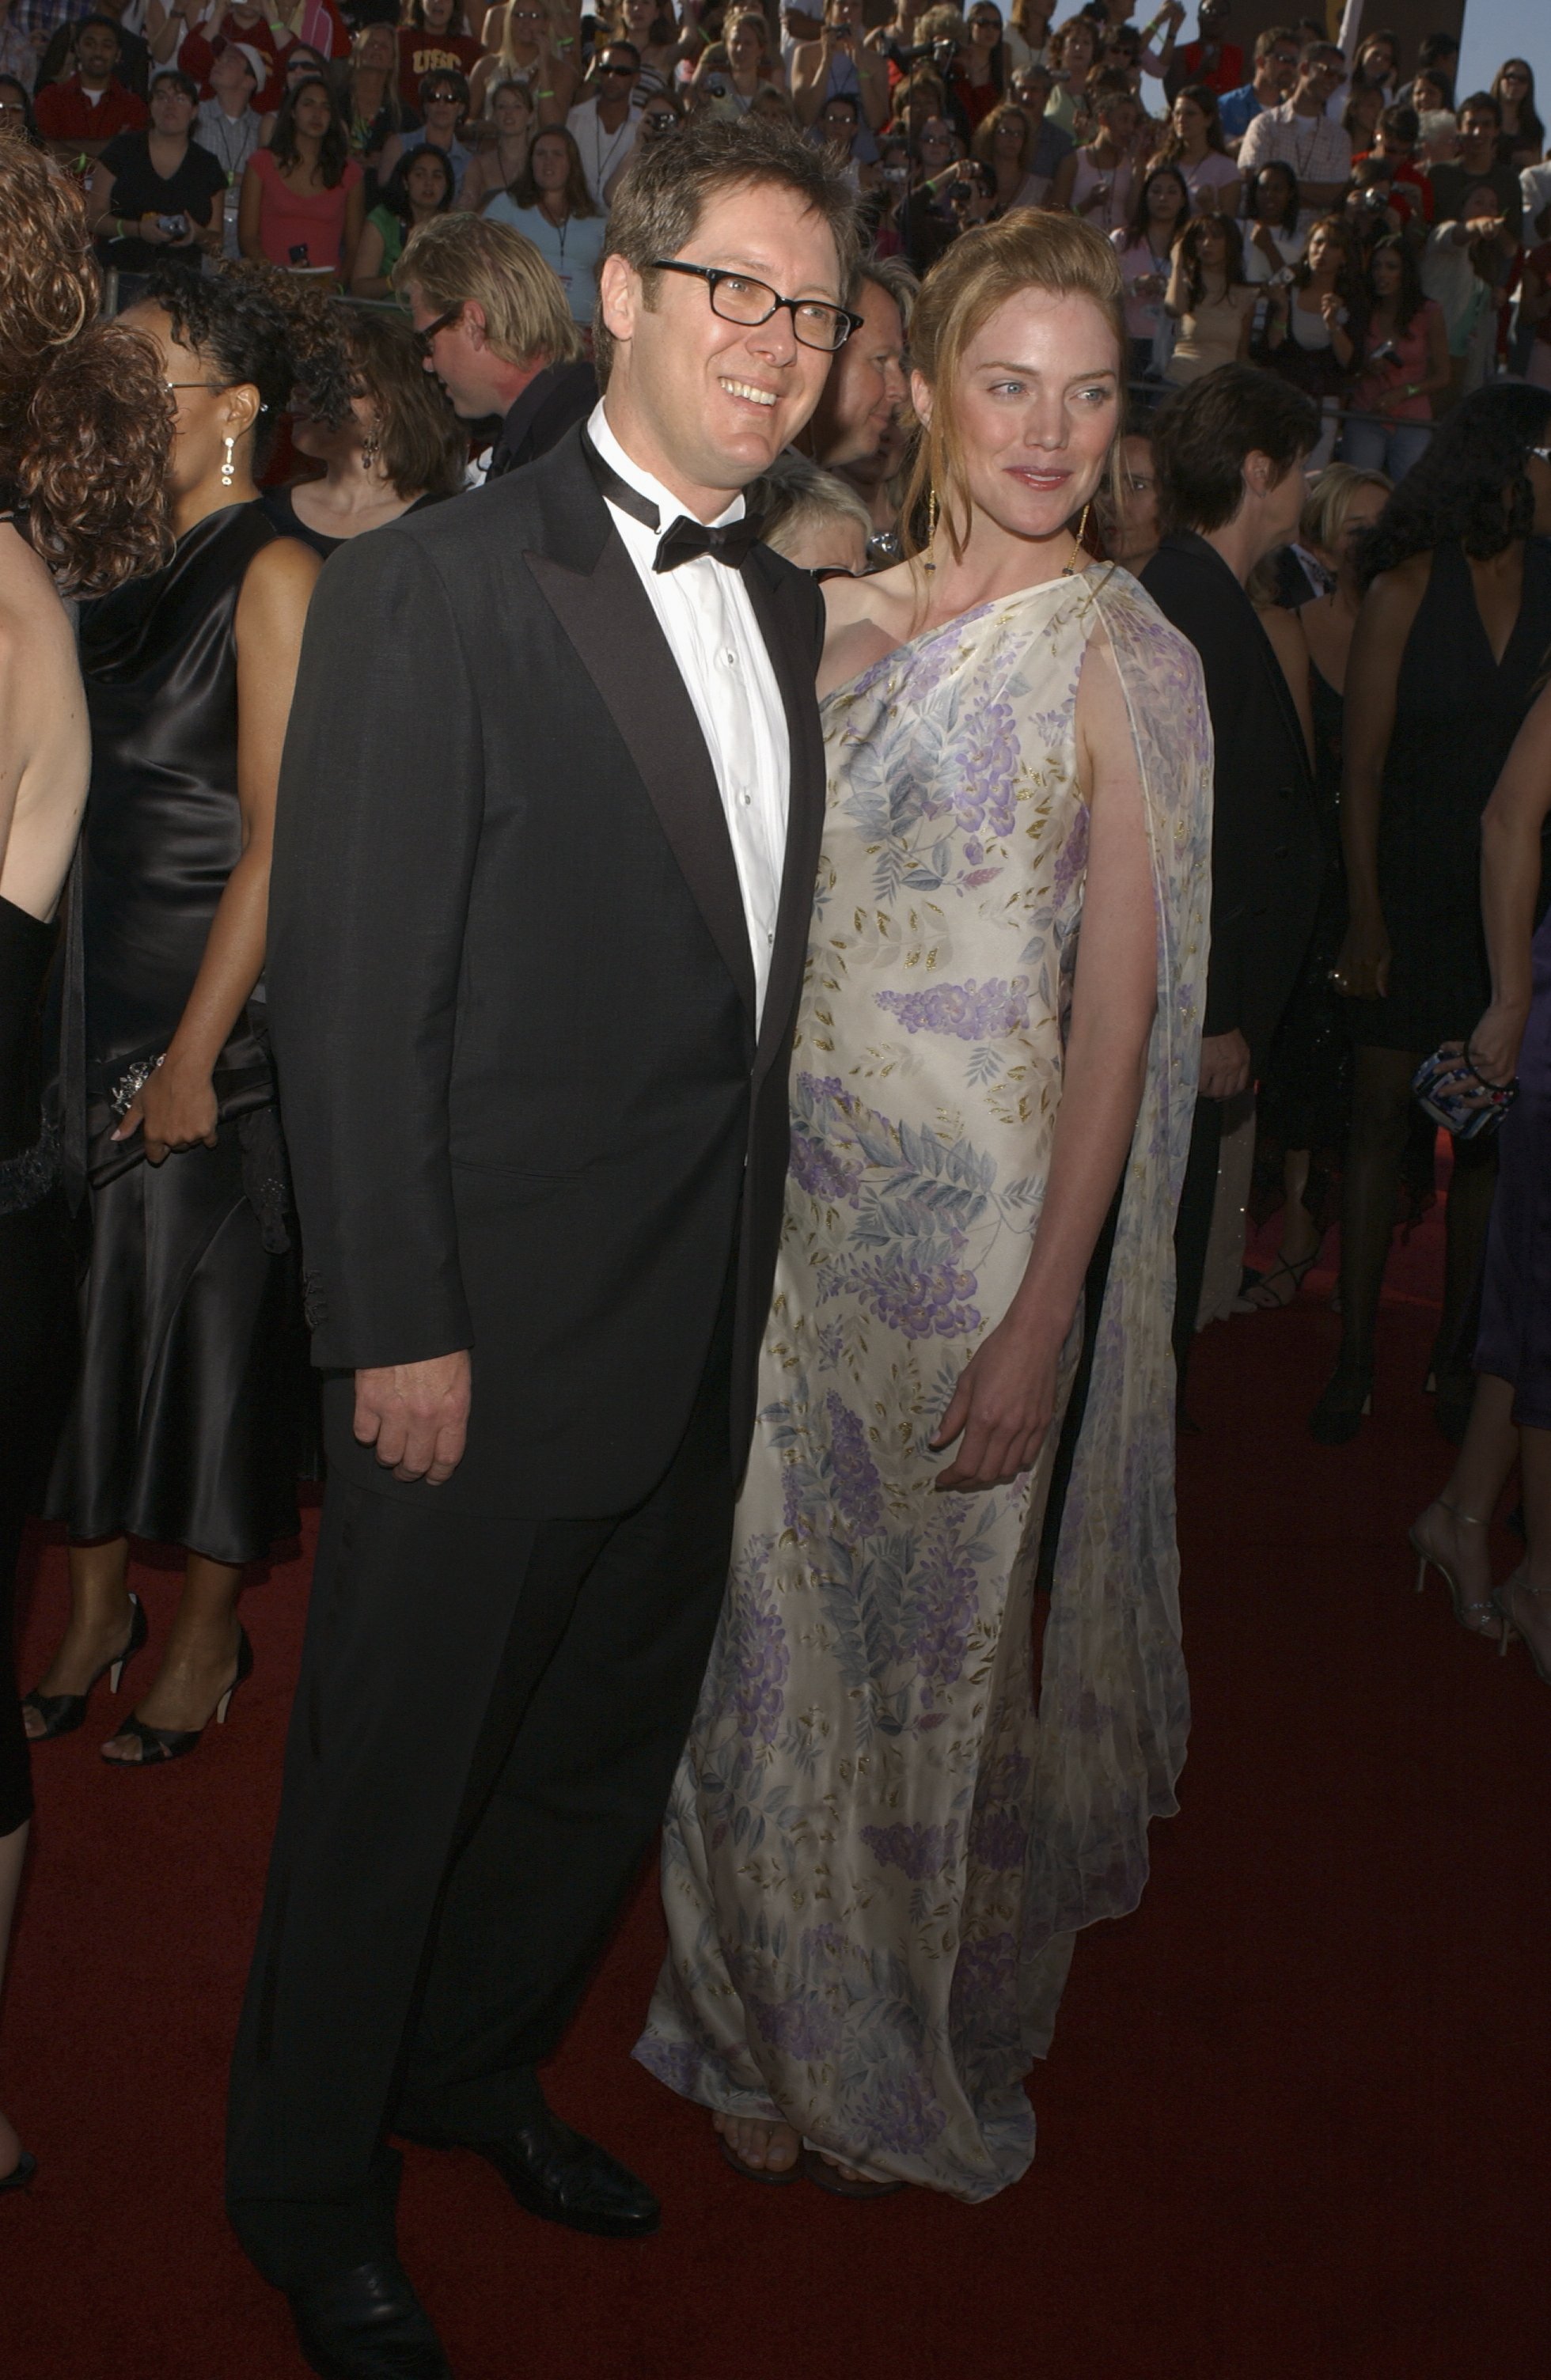 James Spader and Leslie Stefanson at the 56th Annual Primetime Emmy Awards in 2004 | Source: Getty Images